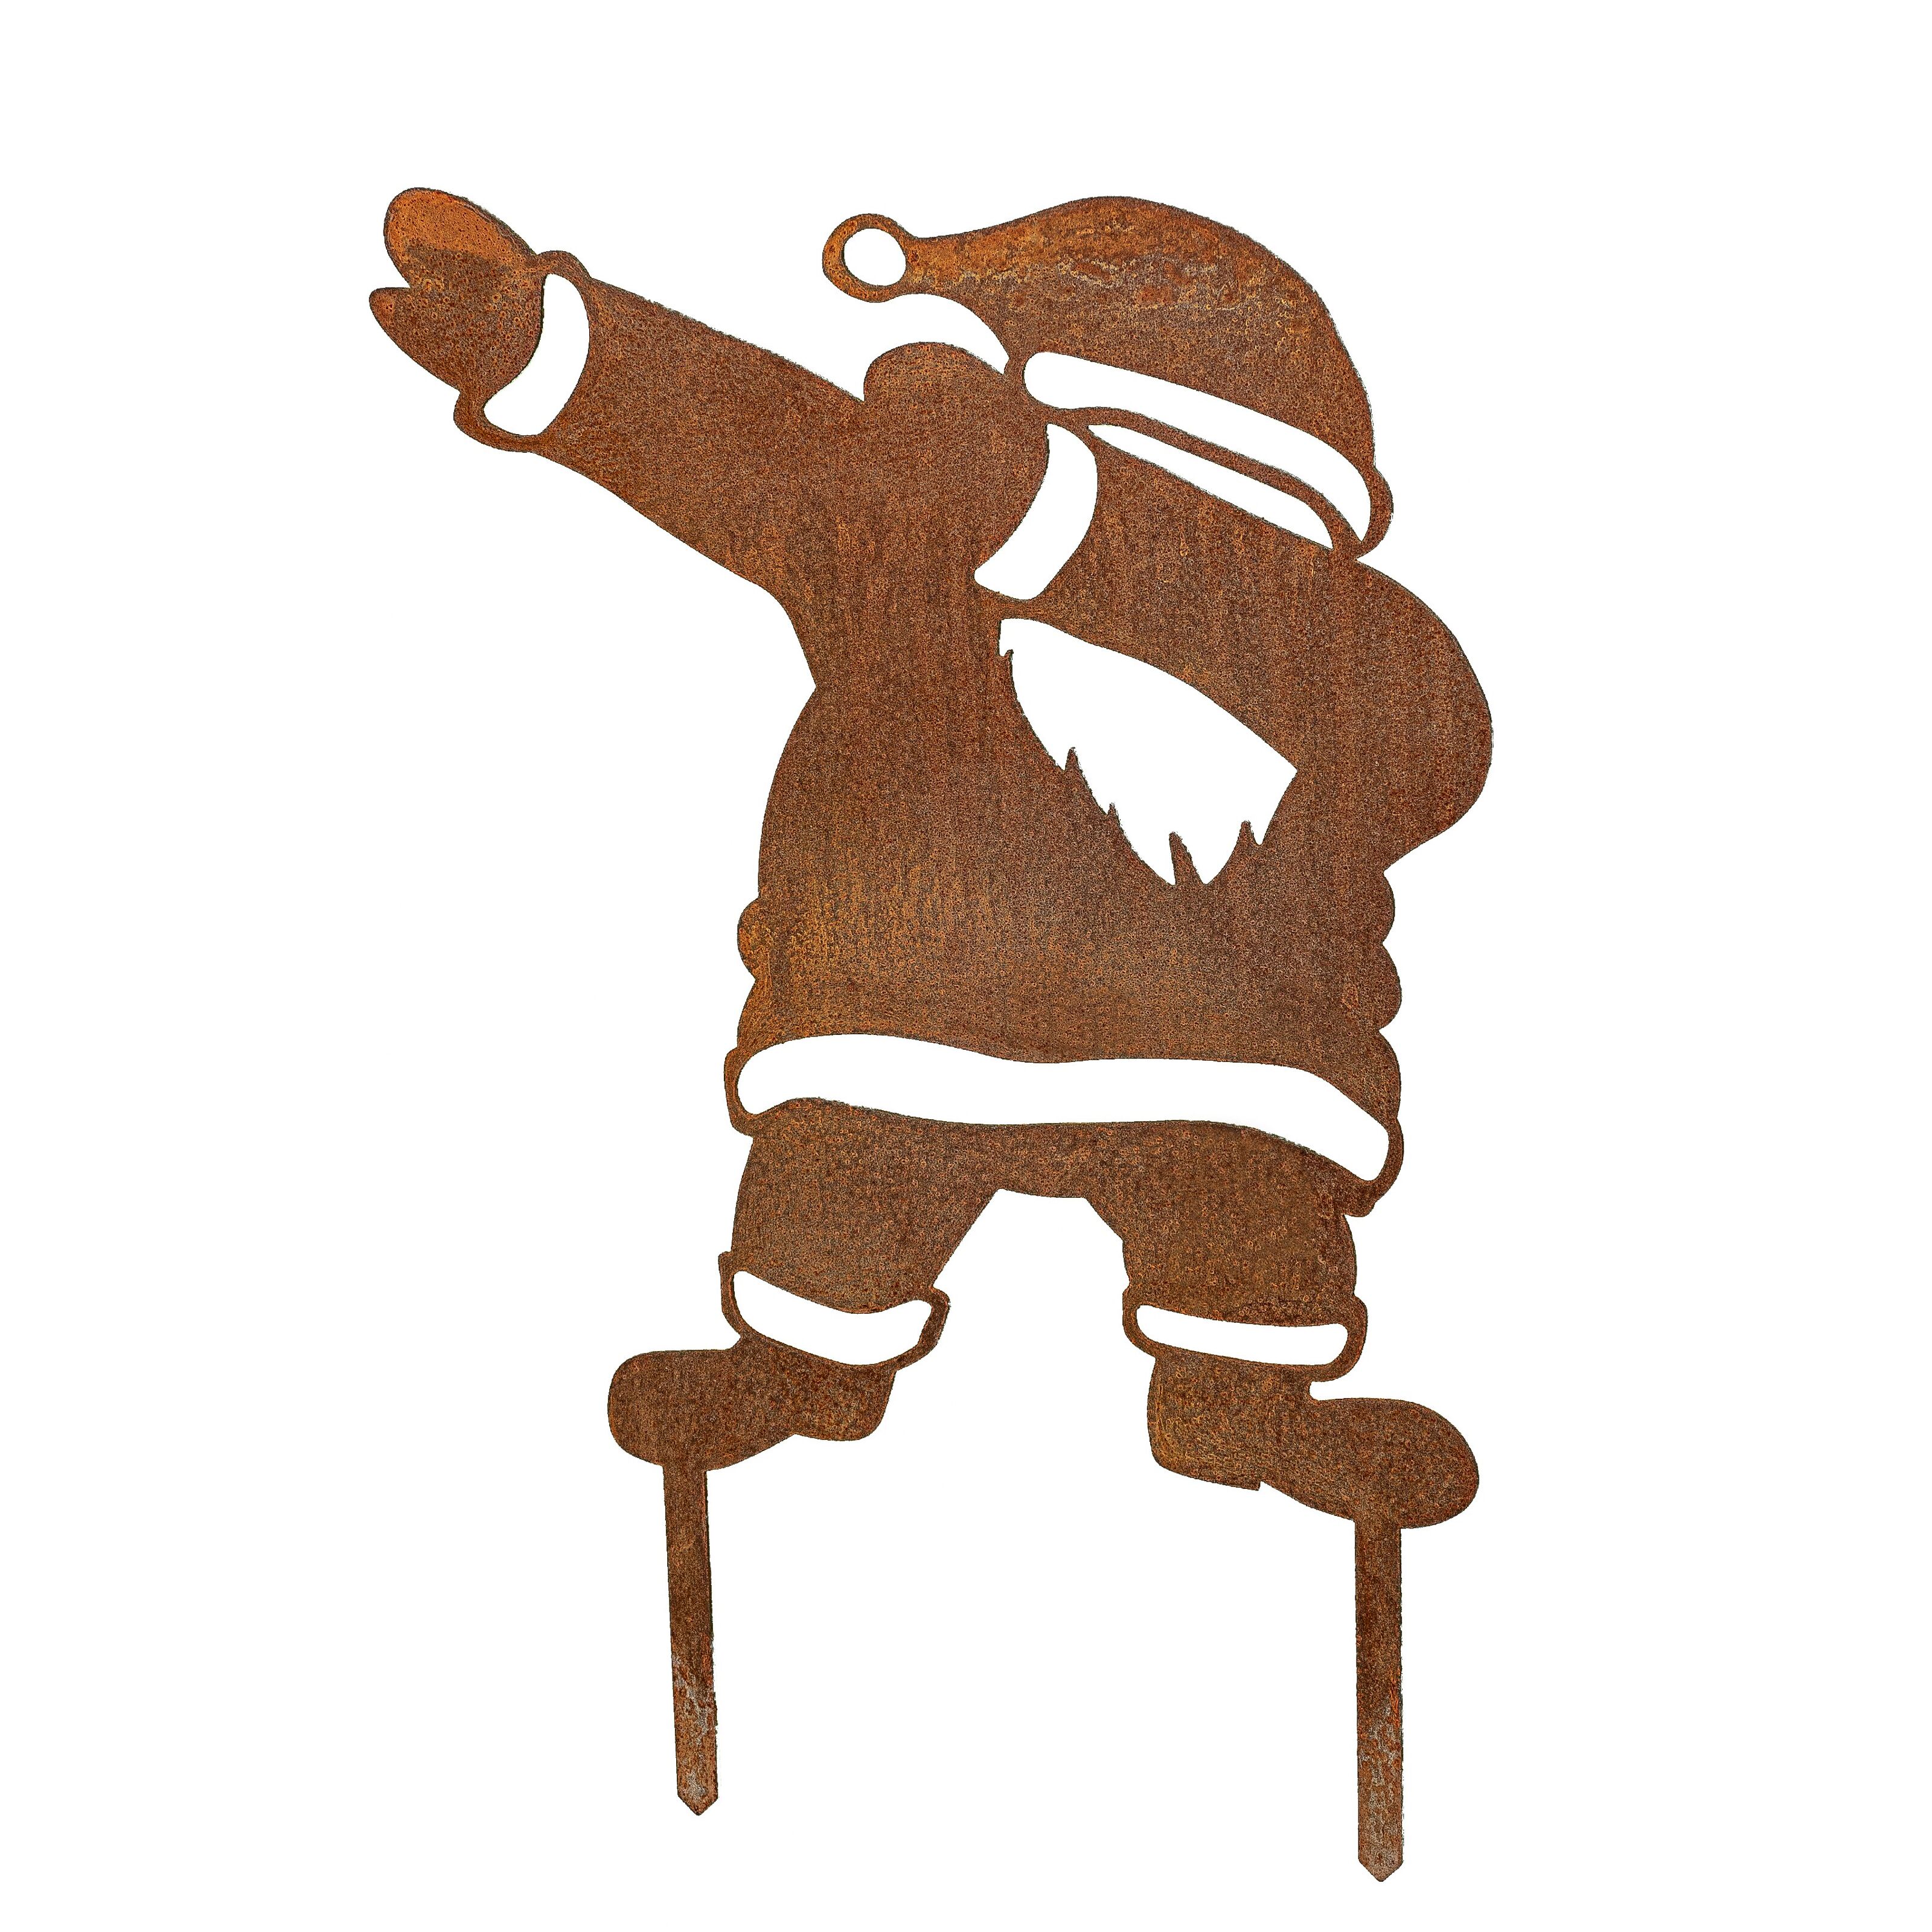 wholesale Claus MM Stake made steel easy rust corten - Christmas Buy decoration / Garden Styles Funny rust Santa insert garden of decoration decoration to - Steel high-quality